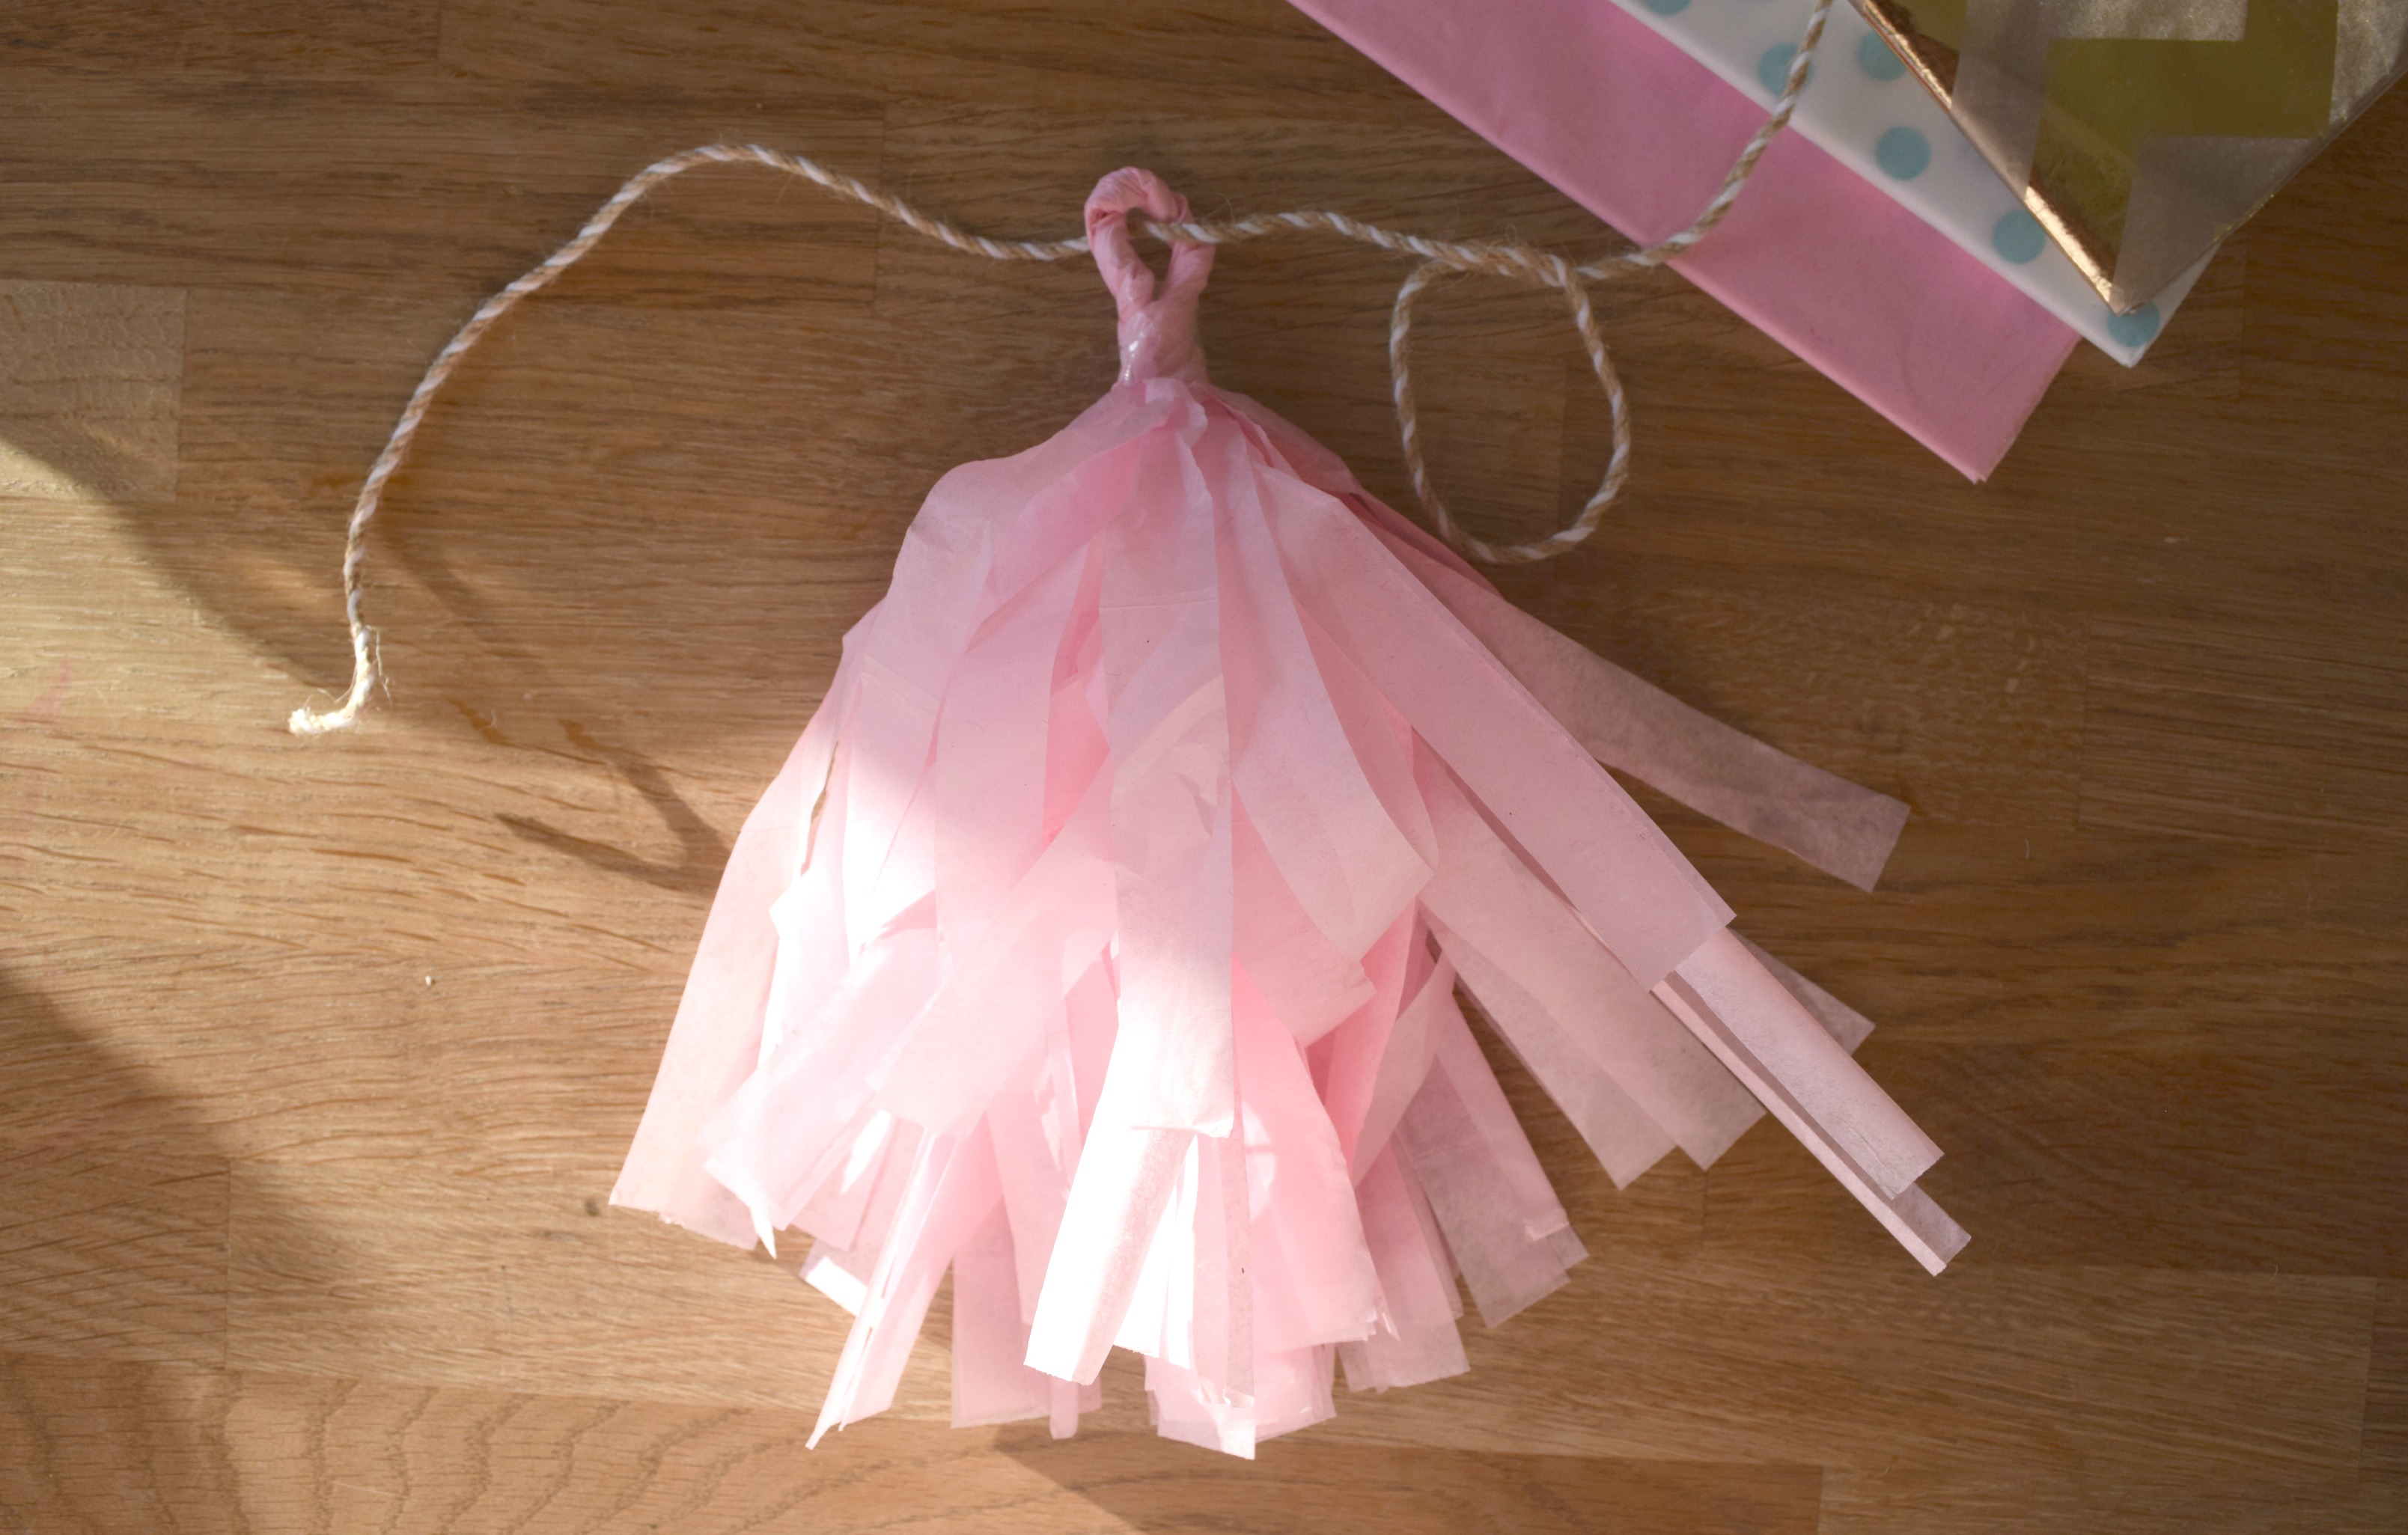 Finished tassel made from tissue paper